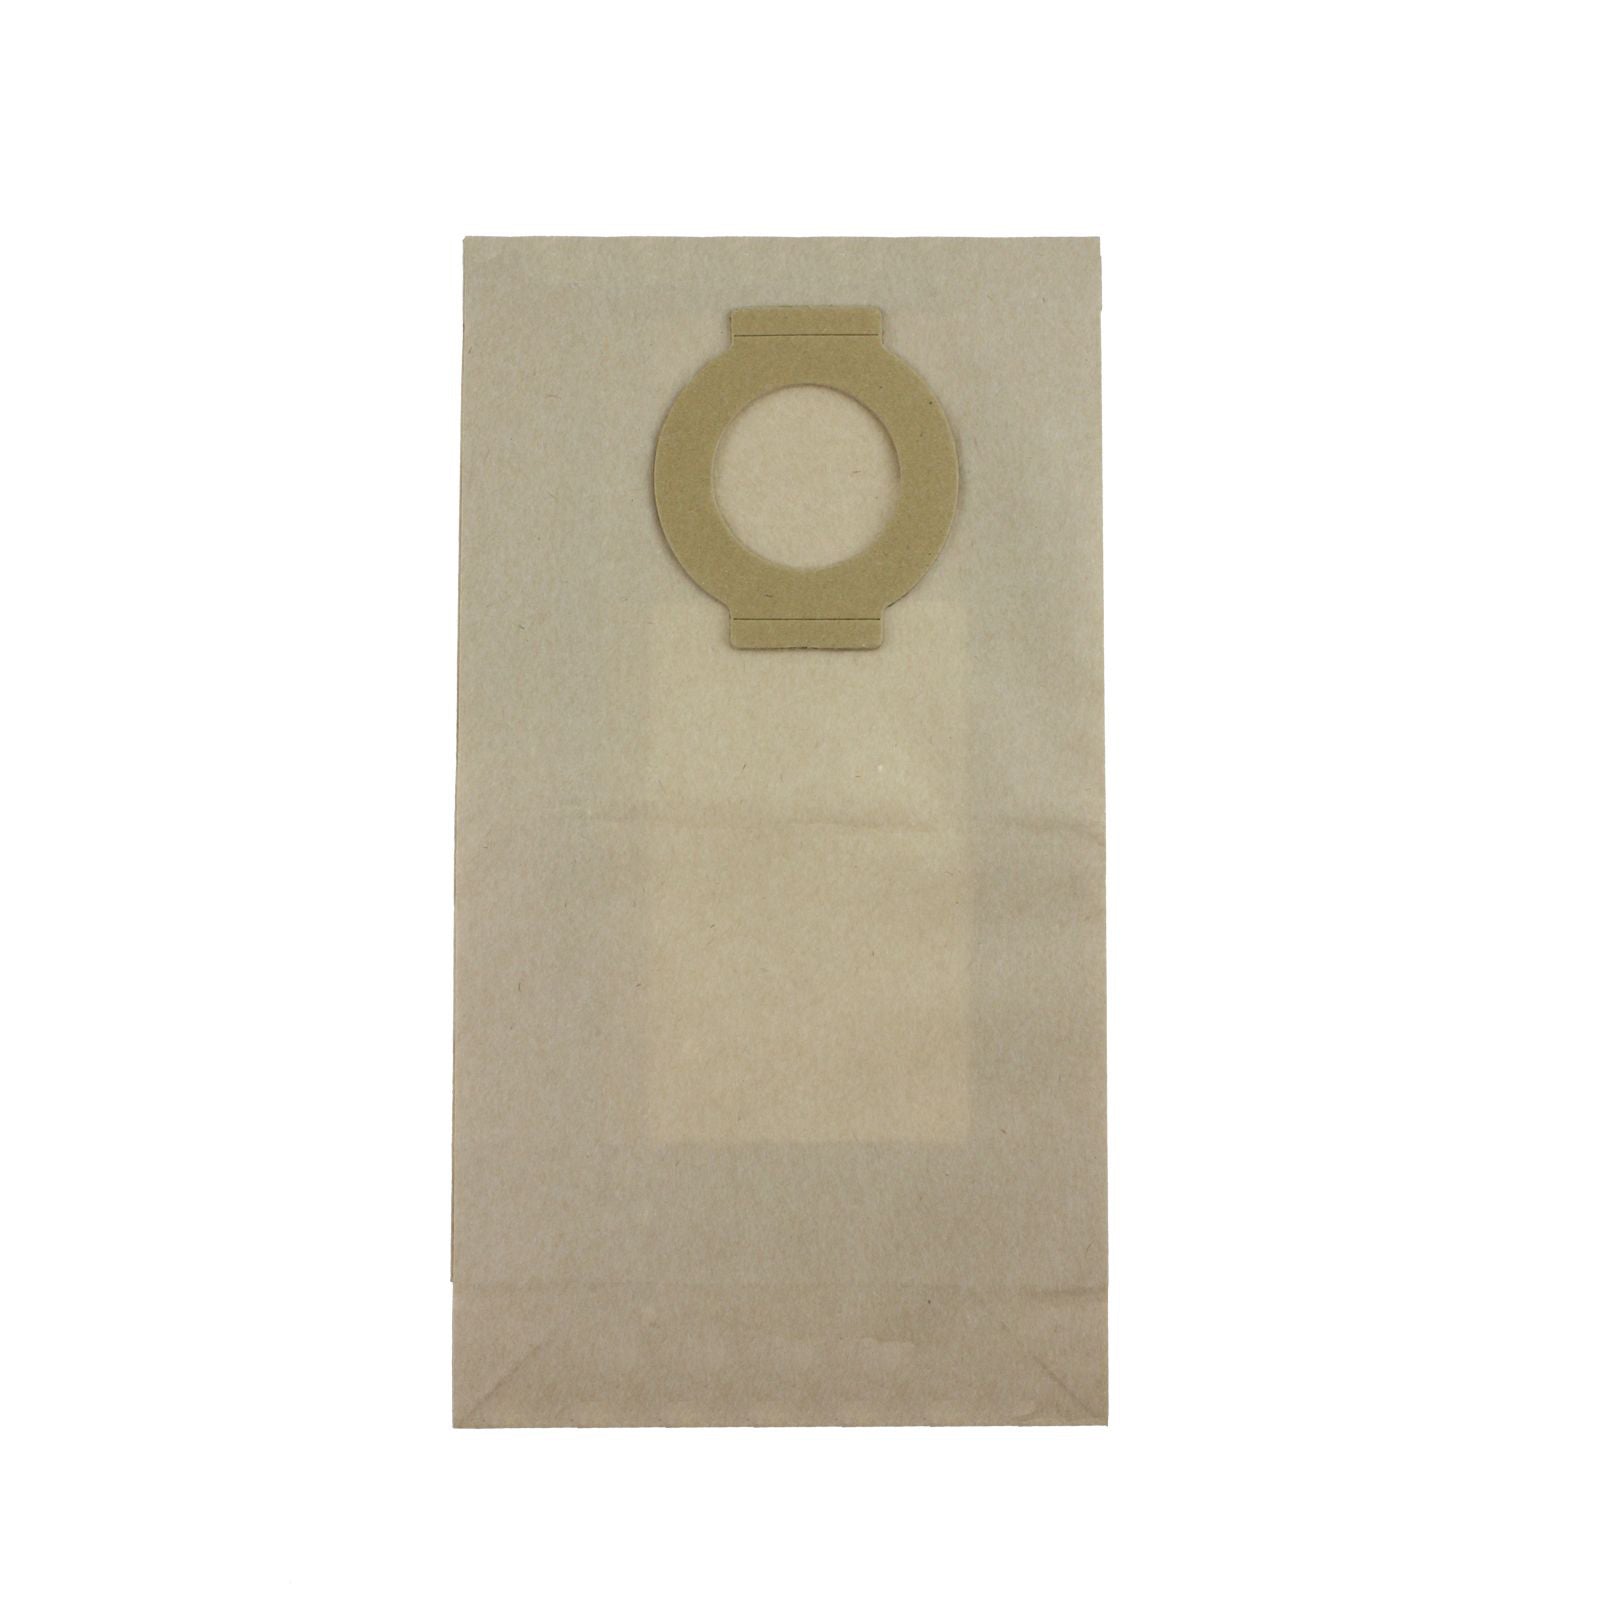 Vacuum Cleaner Dust Bags (Pack of 10 + 10 Fresheners) compatible with Hoover vacuum cleaner